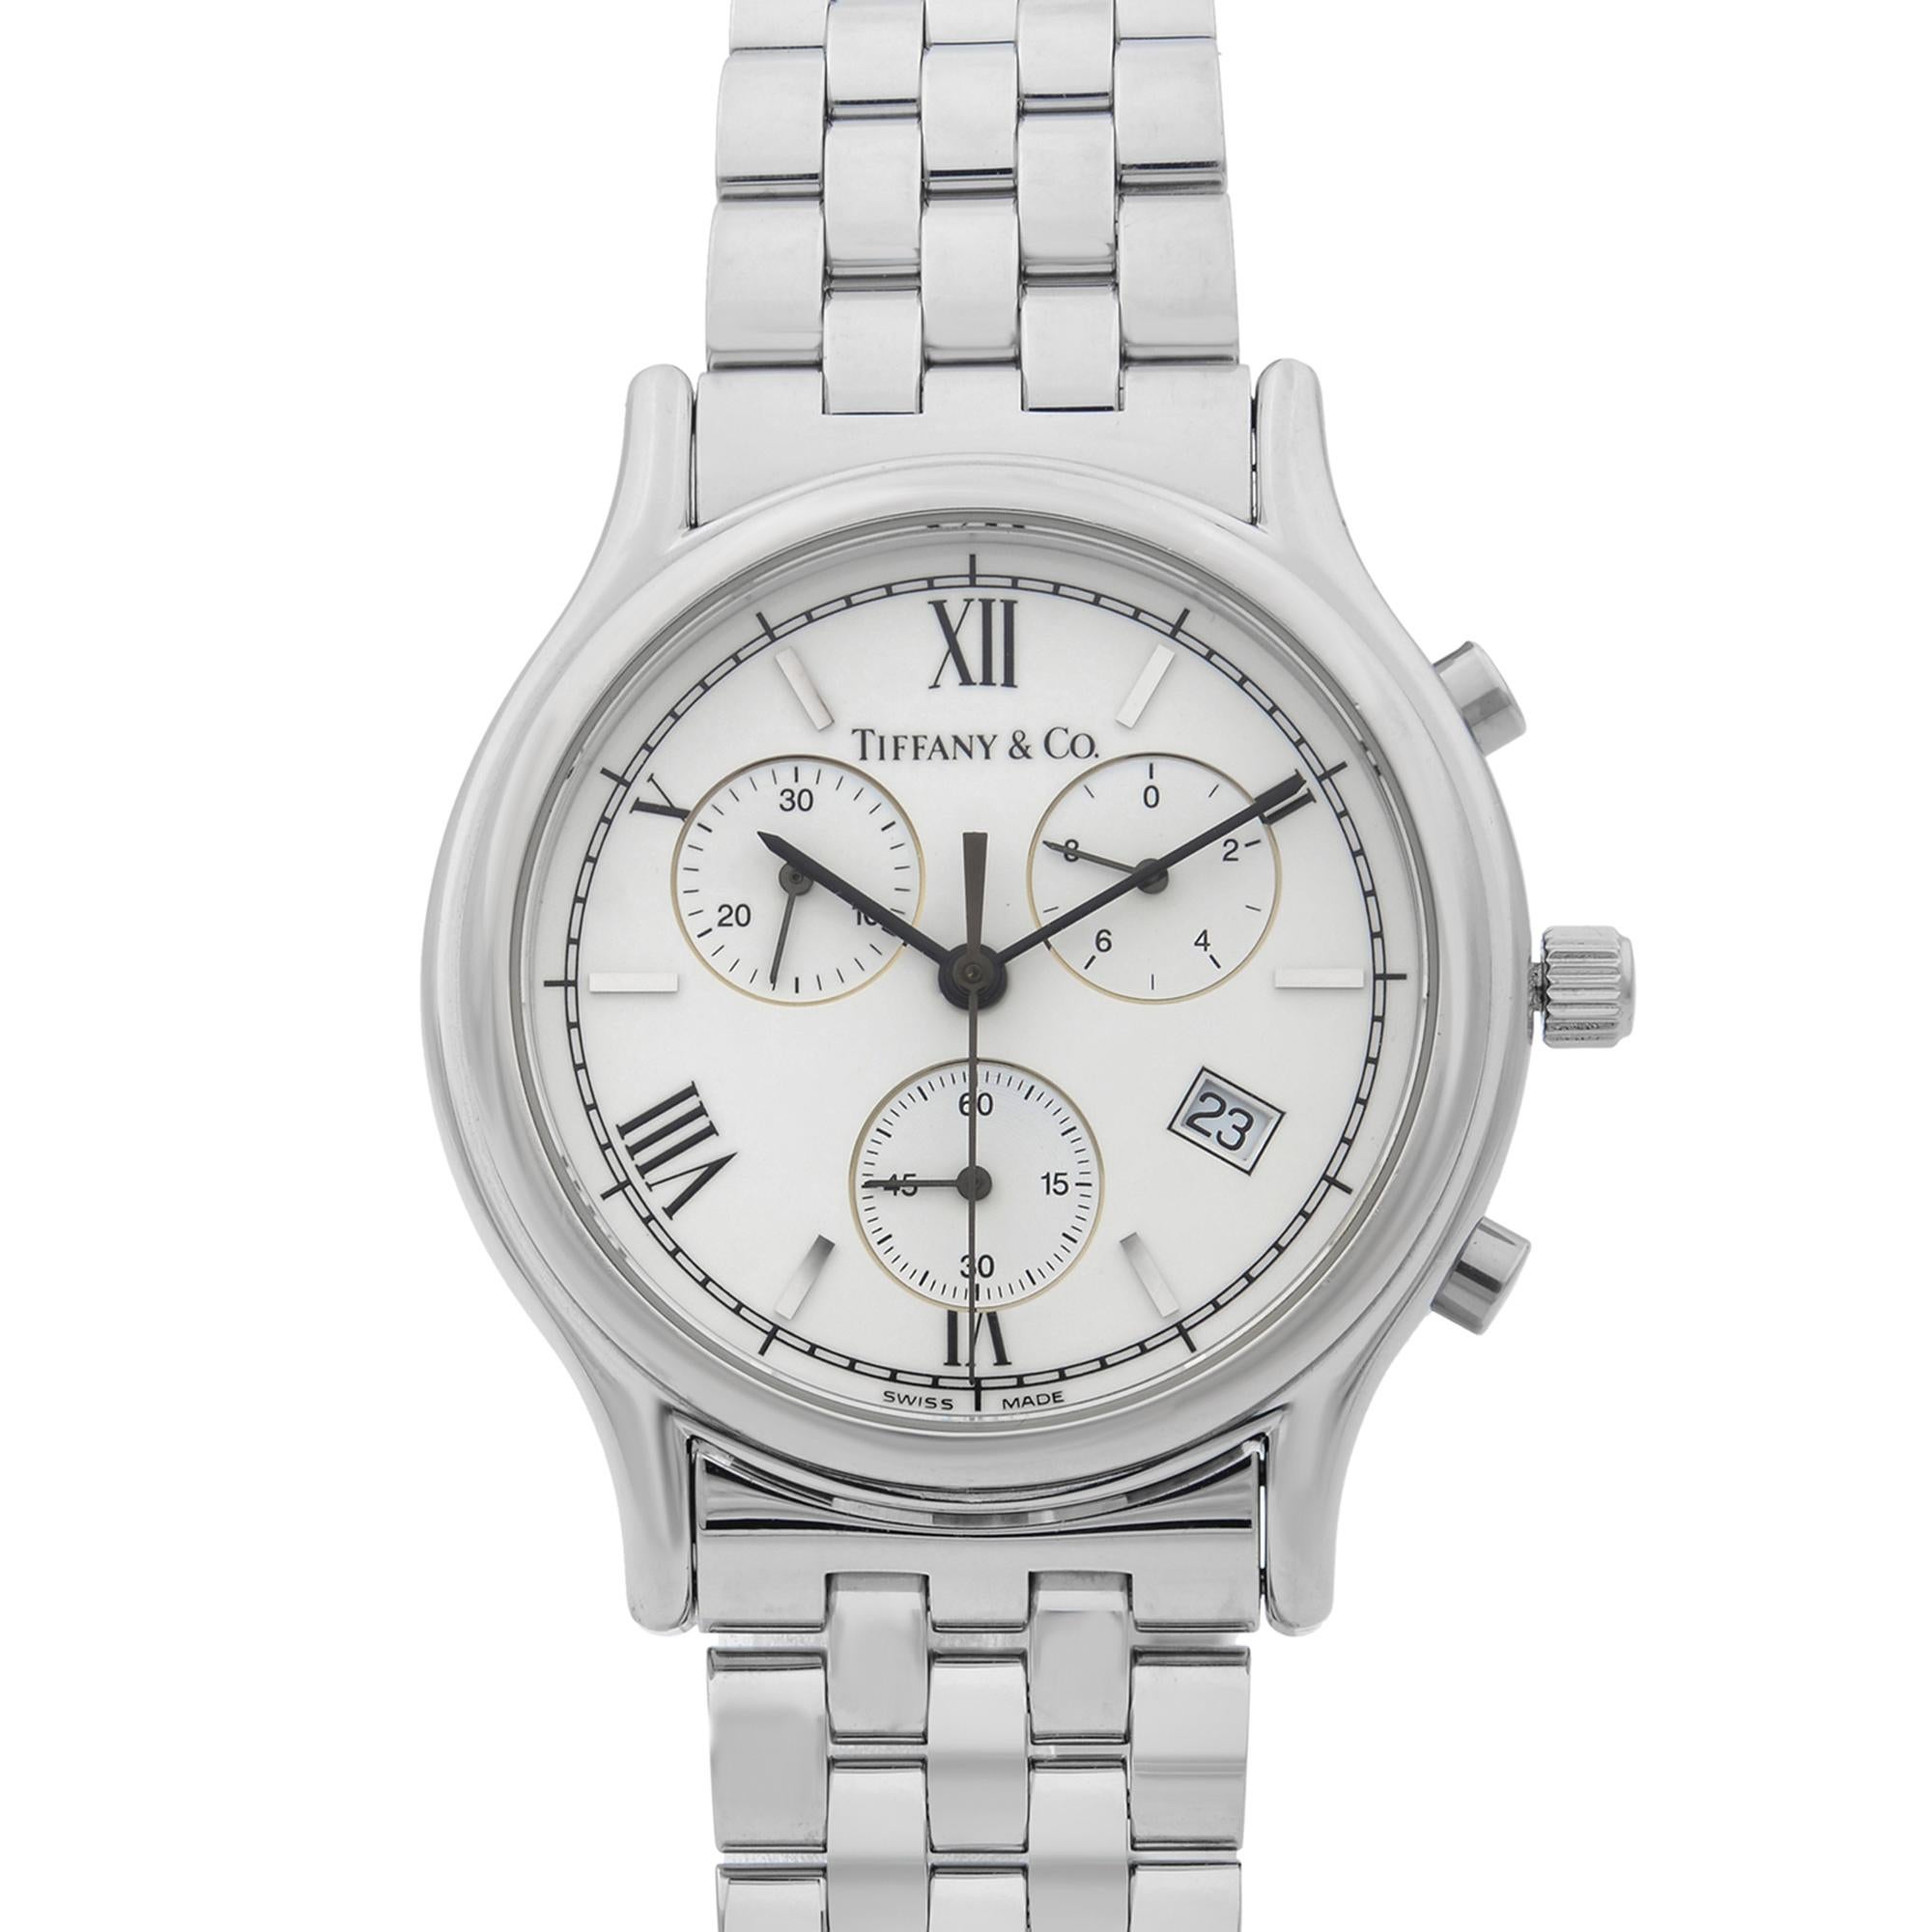 This pre-owned Tiffany & Co  NA is a beautiful men's timepiece that is powered by quartz (battery) movement which is cased in a stainless steel case. It has a round shape face, chronograph, date indicator, small seconds subdial dial and has hand